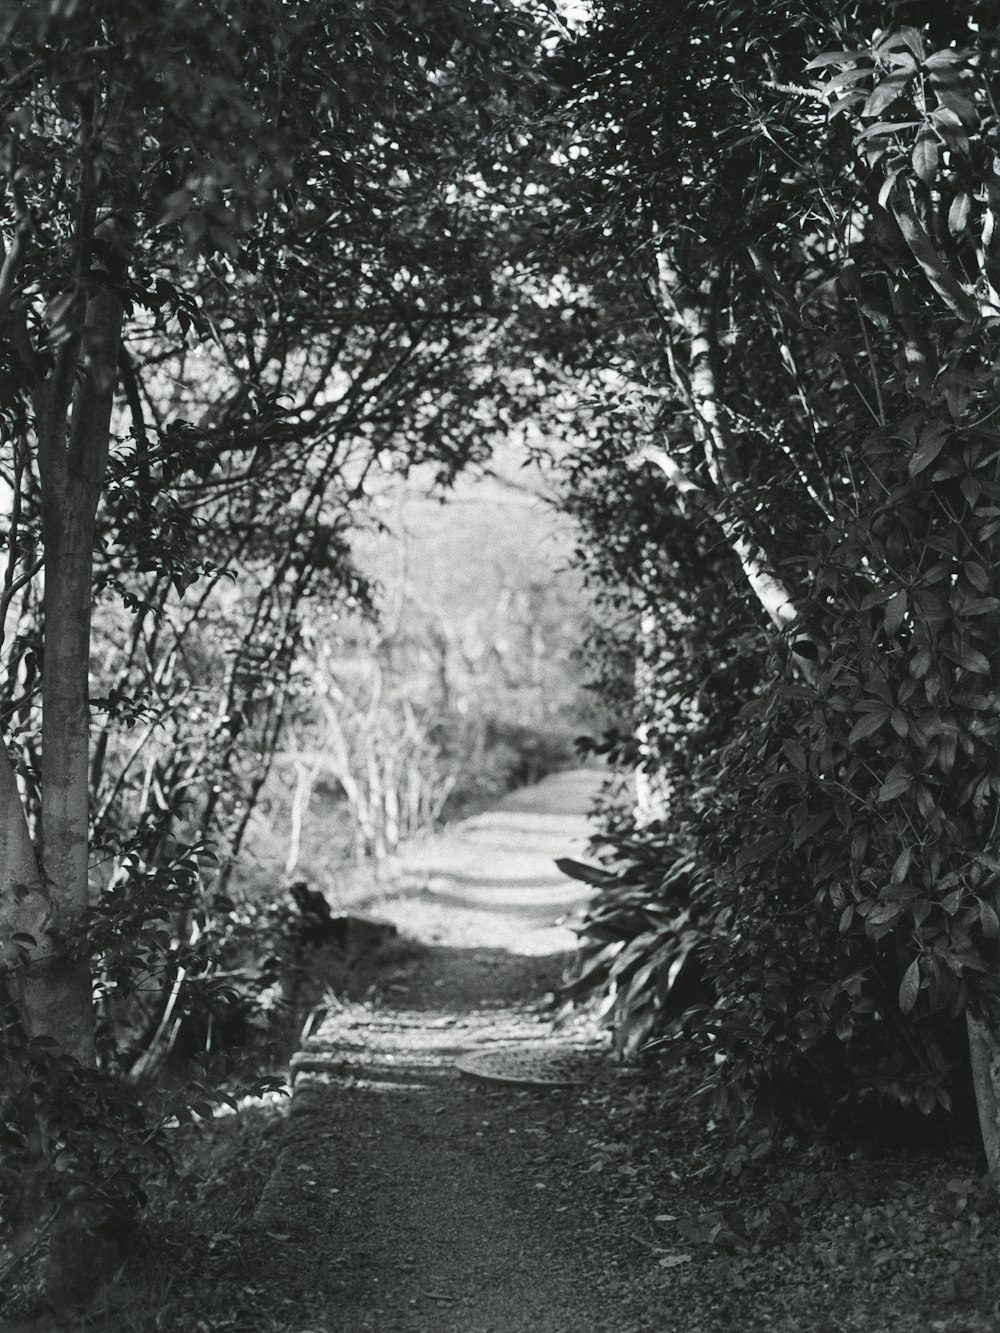 a black and white photo of a path through some trees